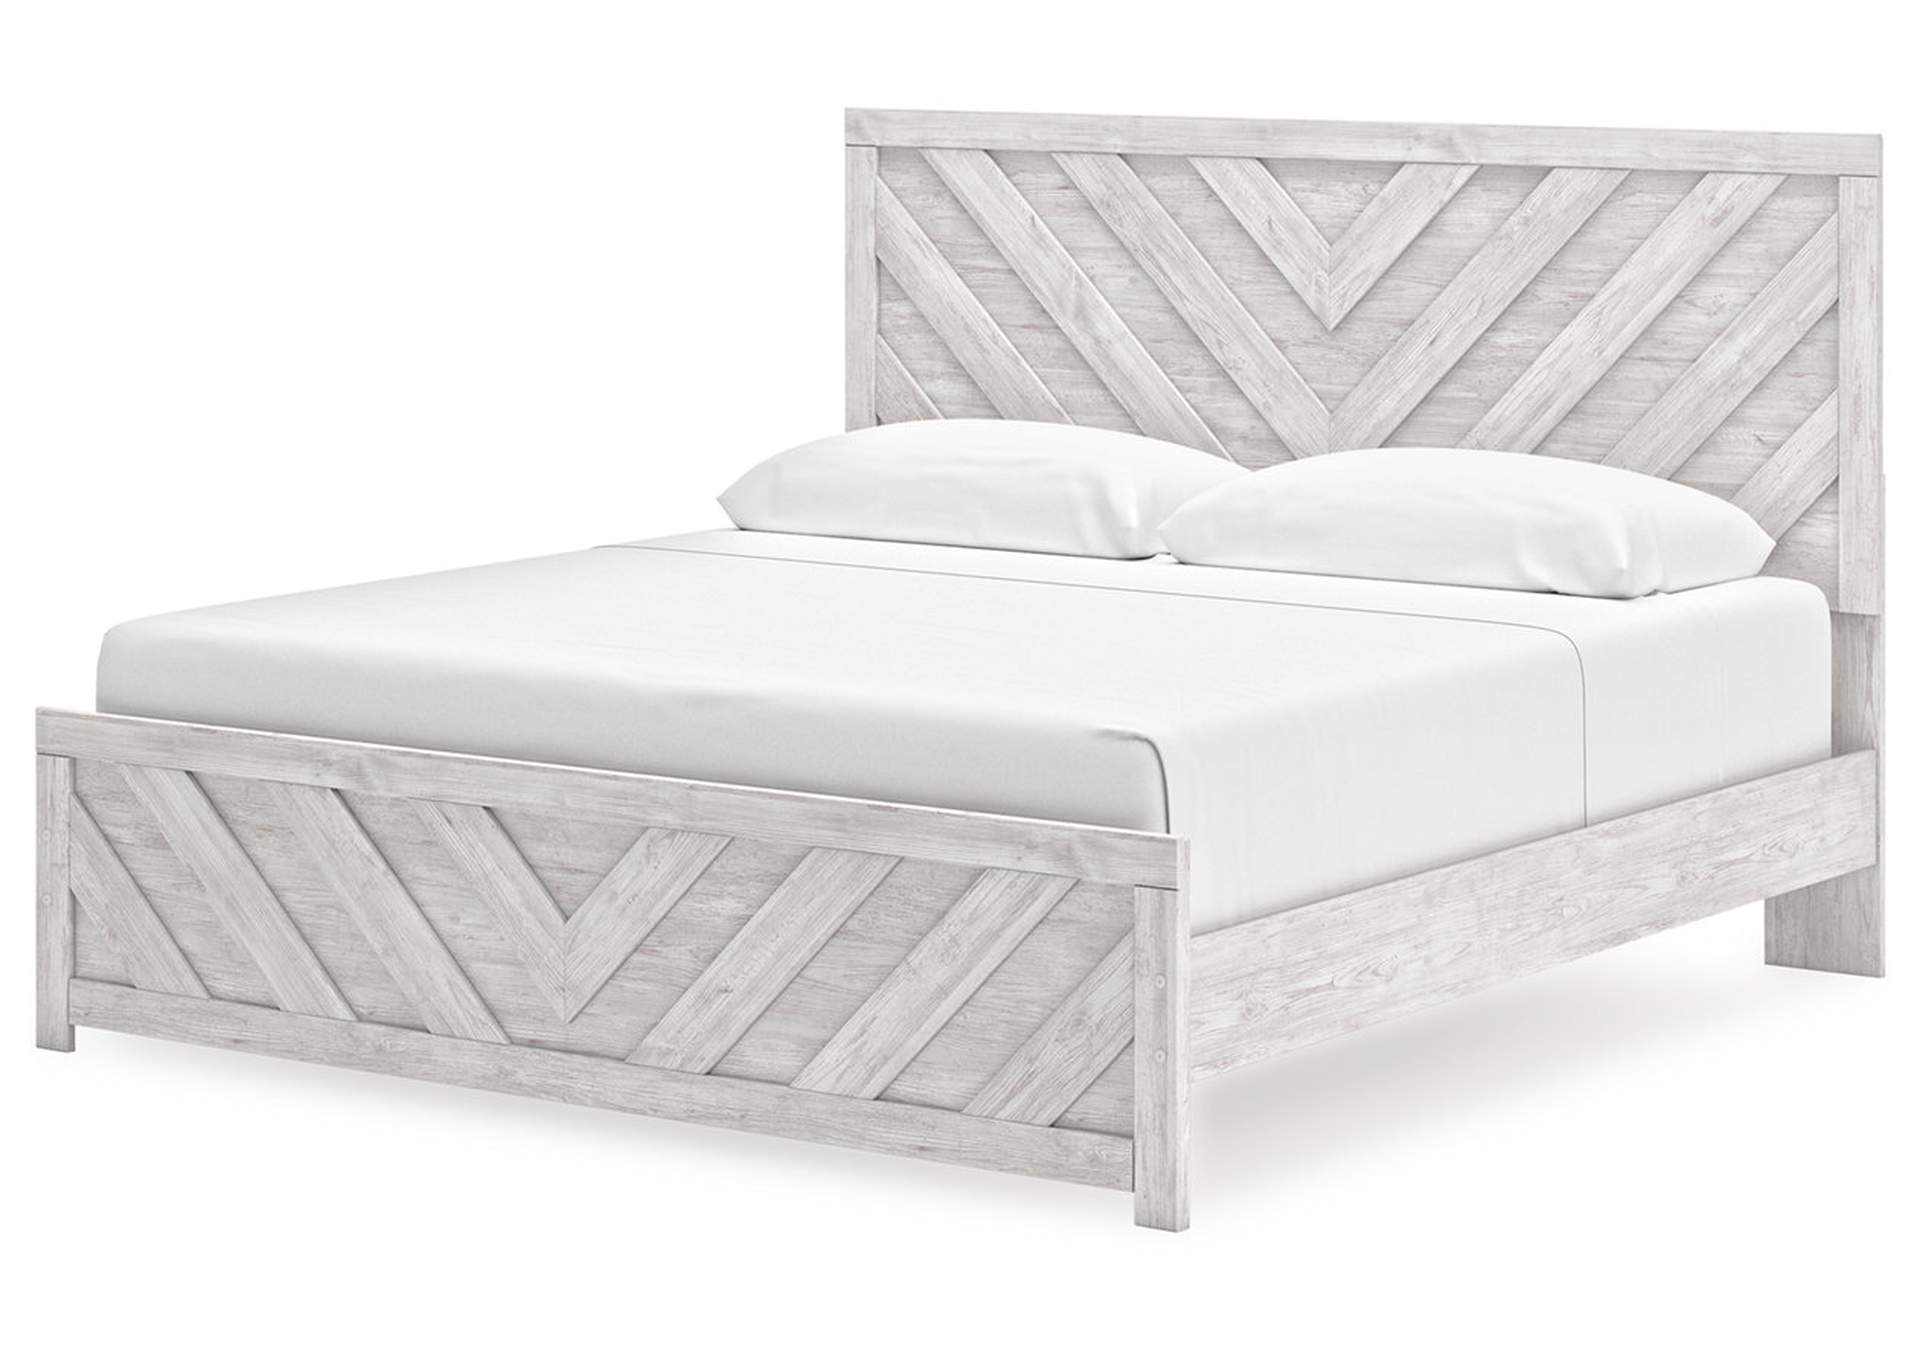 Cayboni King Panel Bed,Signature Design By Ashley